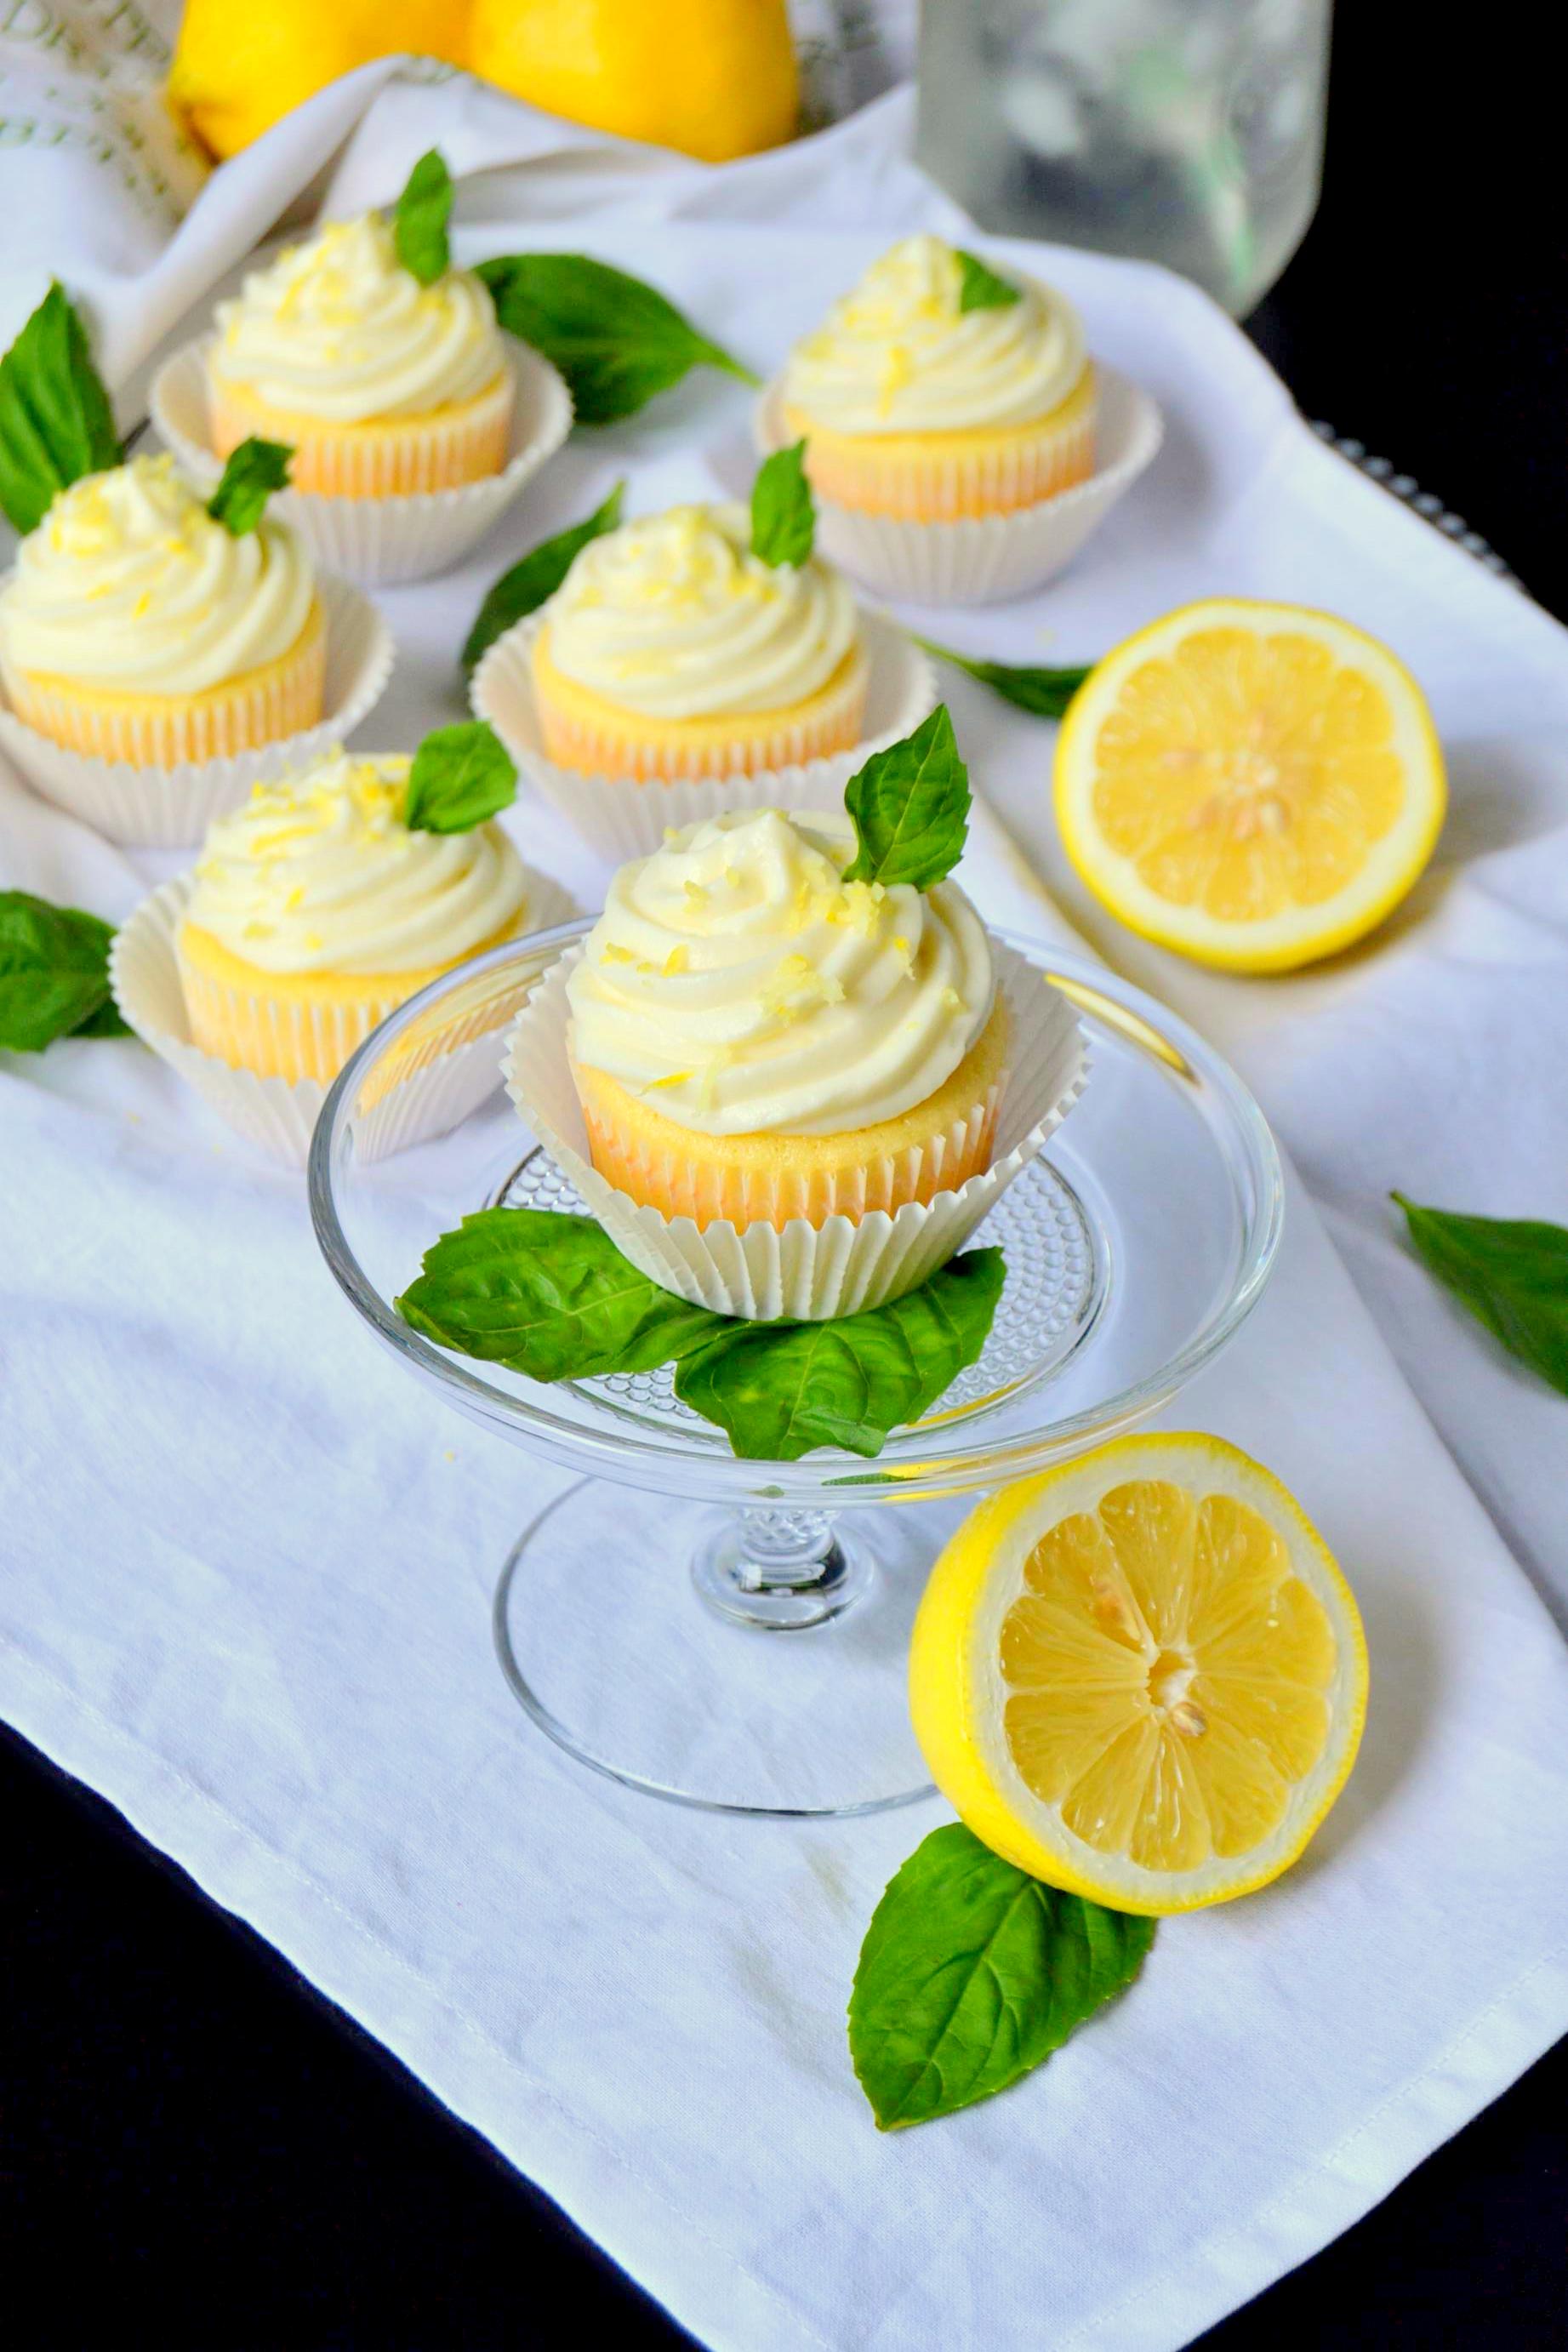 Lemon Cupcakes with Basil Whipped Cream Frosting